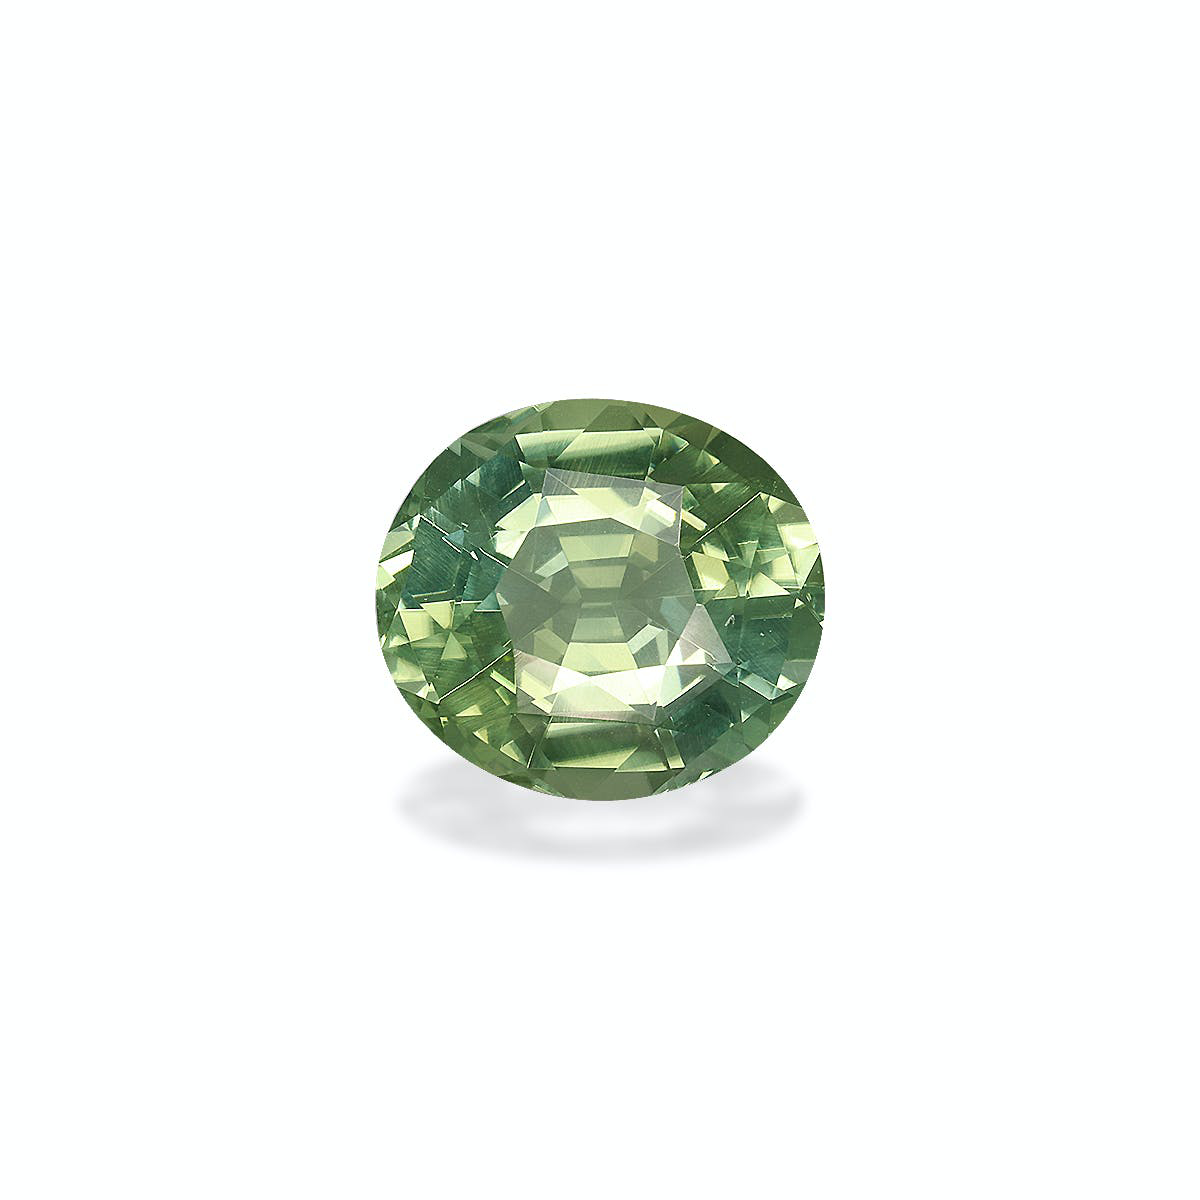 Picture of Cotton Green Tourmaline 9.69ct - 15x13mm (TG0707)